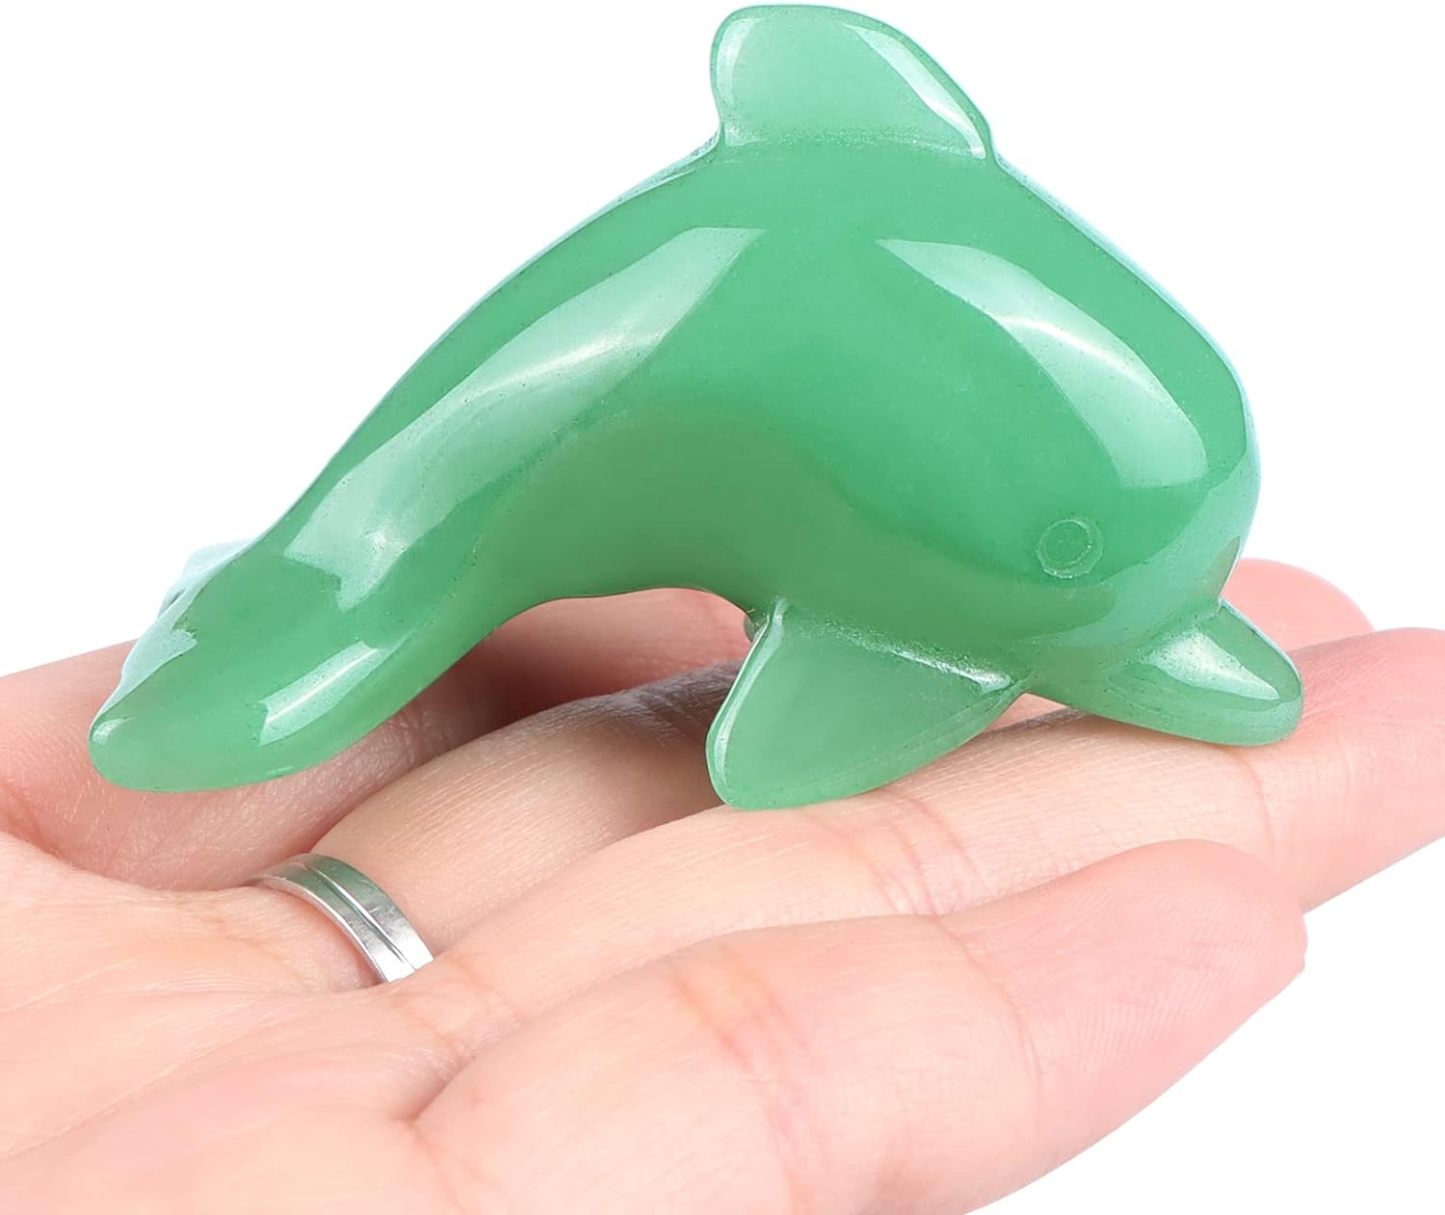 Green Jade Crystal Dolphin Statue Crystal Dolphin Figurine Collectibles,Dolphin Gifts for Women, Sea Animal Sculpture, Home Office Desk Decoration Ornaments Green Aventurine